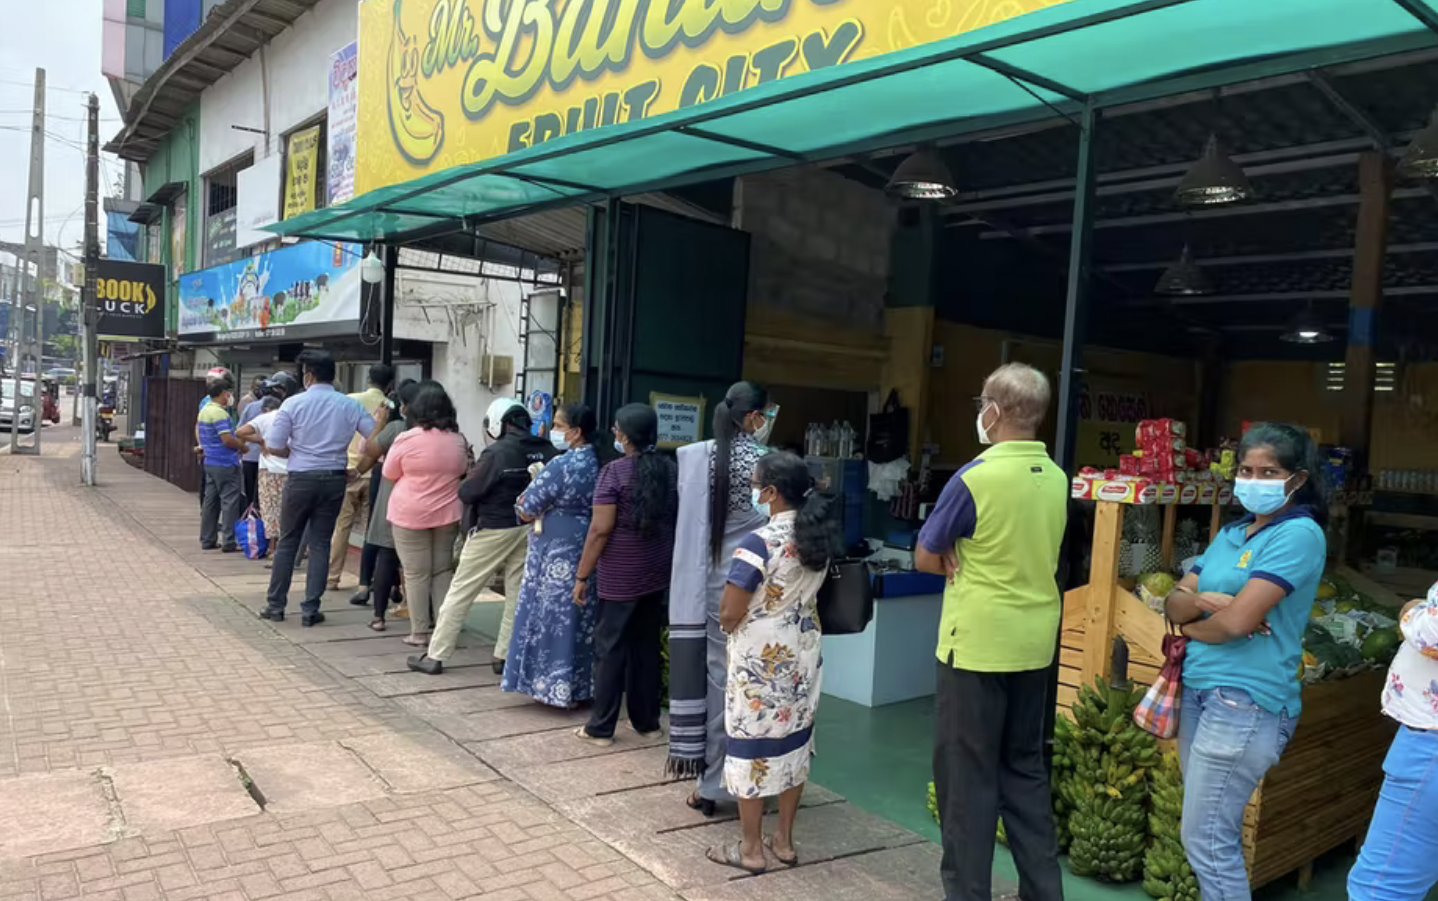 Queues for milk in Colombo, Sri Lanka, showing supply shortages that have been evident for months before the Ukraine crisis